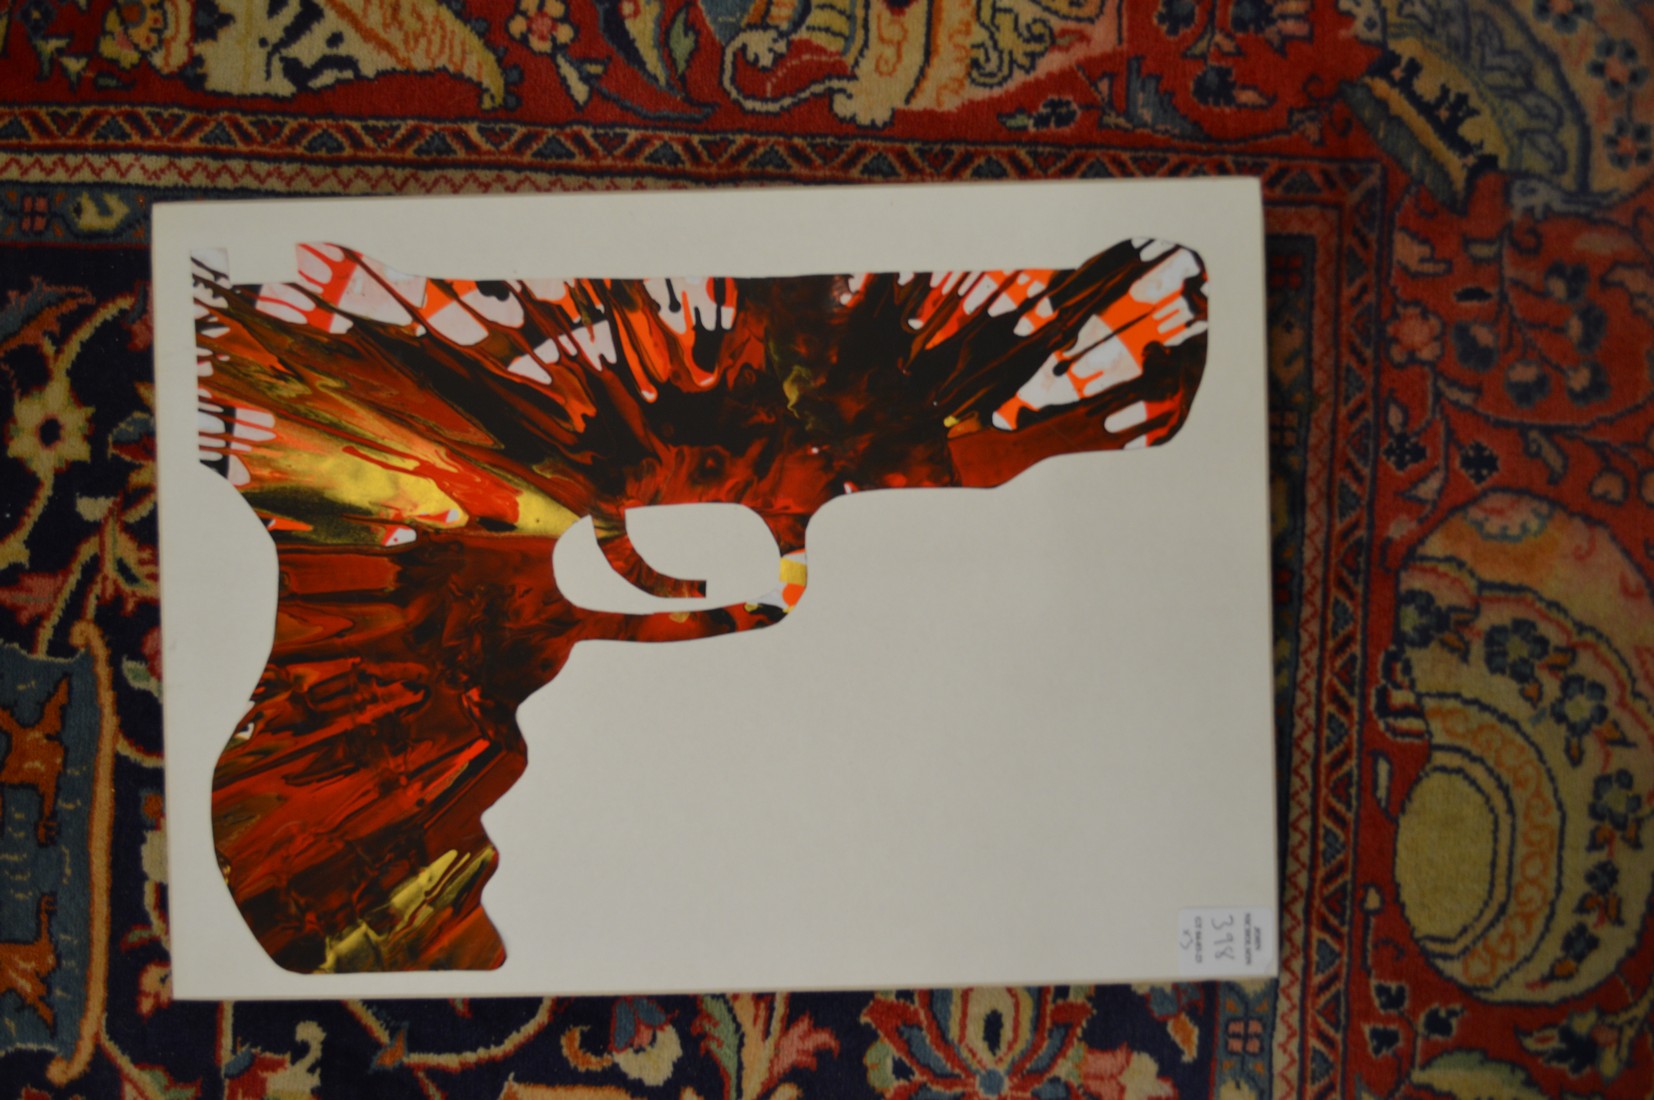 Three prints relating to Damien Hirst including the crystal skull.